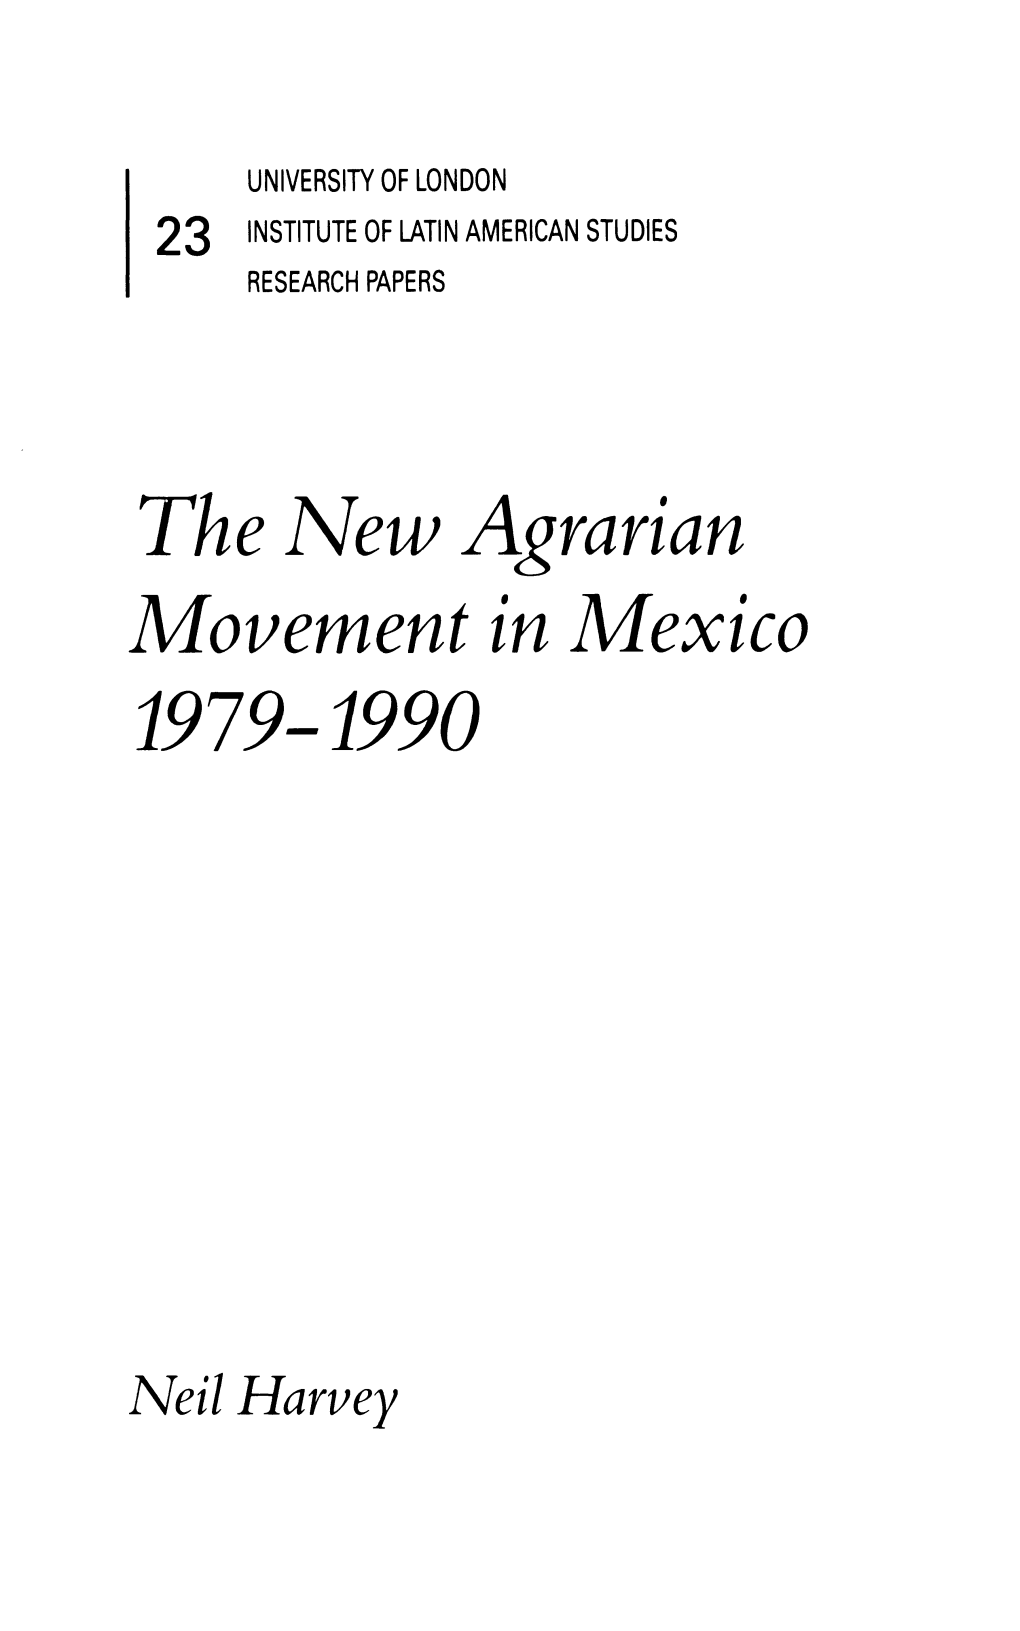 The New Agrarian Movement in Mexico 1979-1990